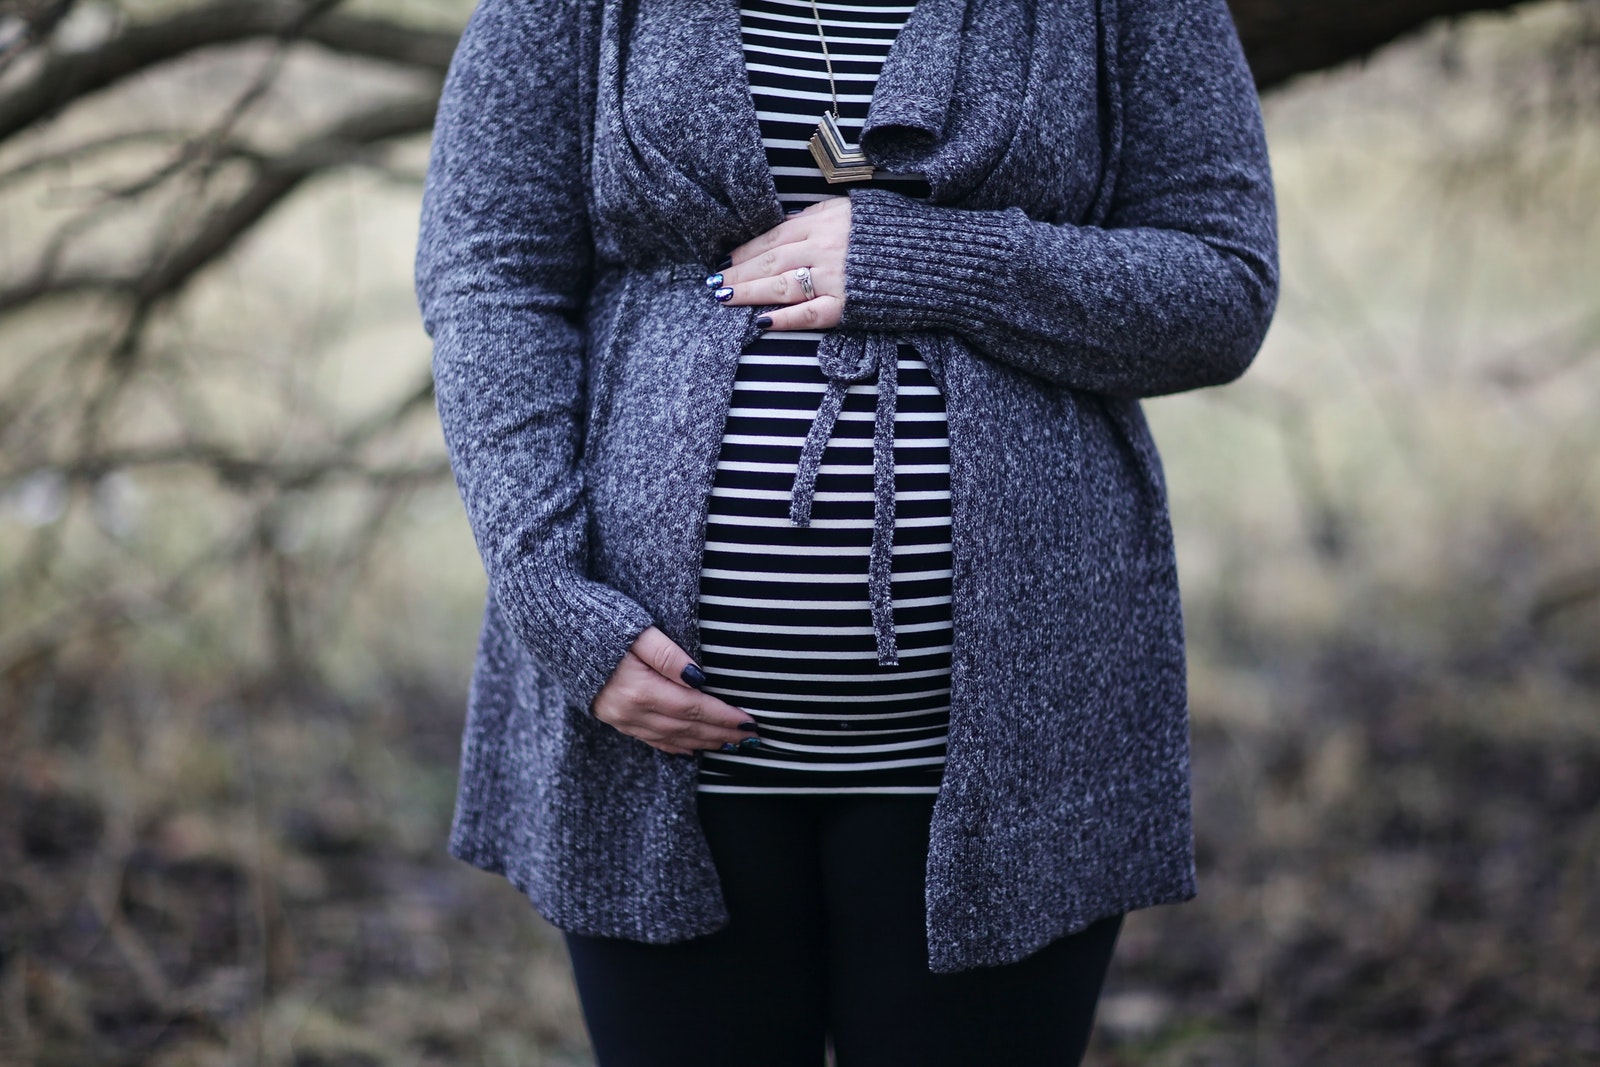 Woman Pregnant in Black and White Striped Shirt Standing Near Bare Tree